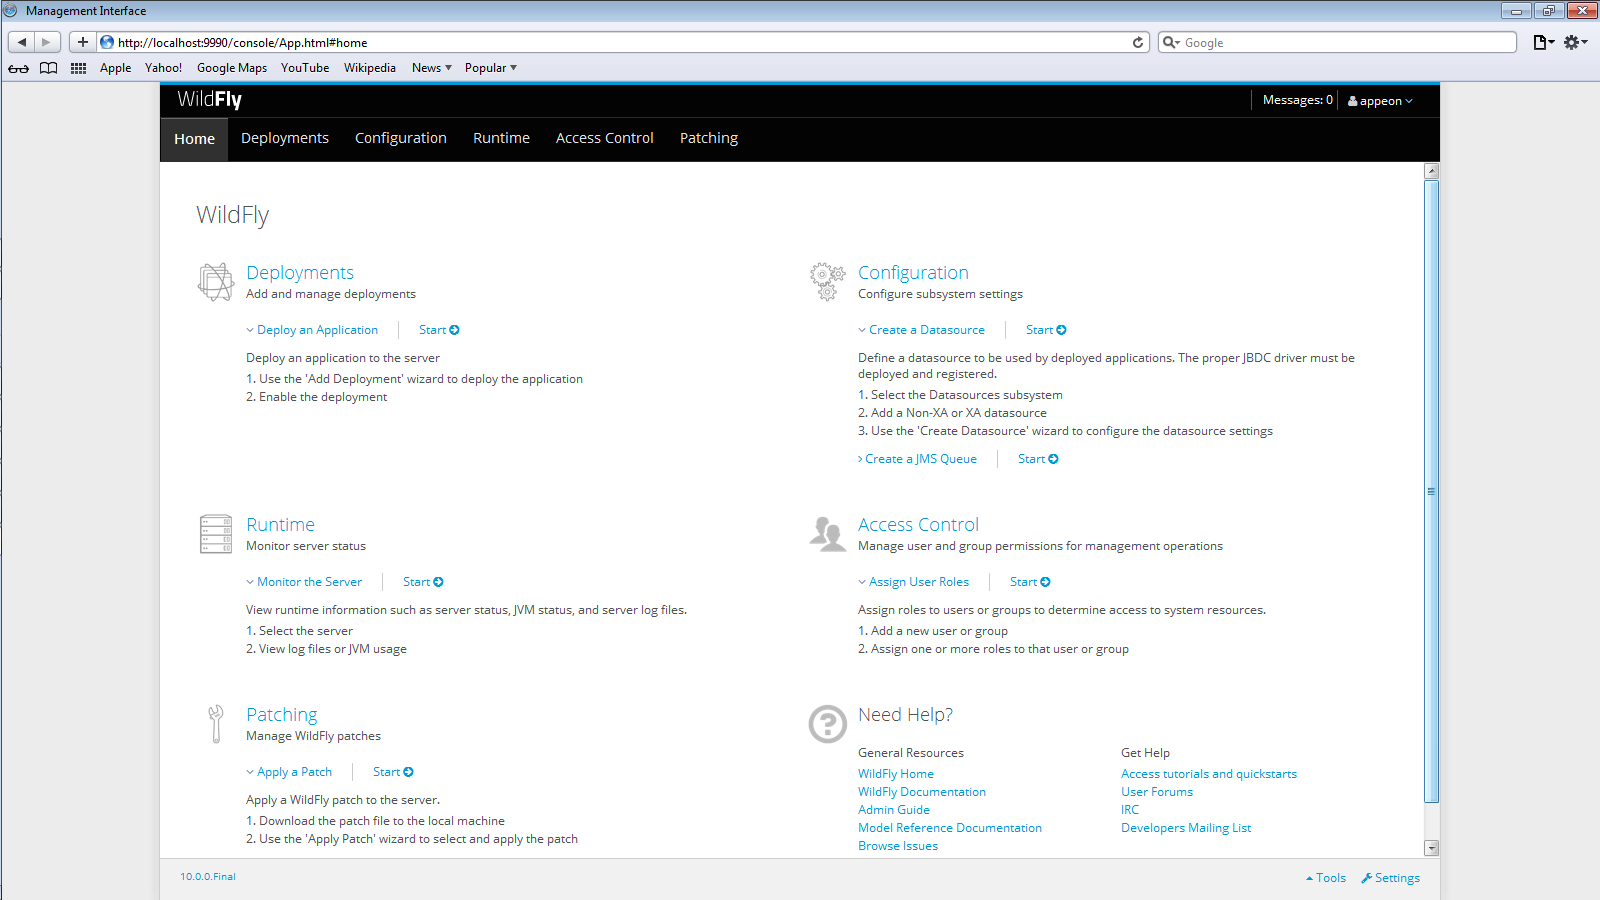 WildFly Management Interface main page